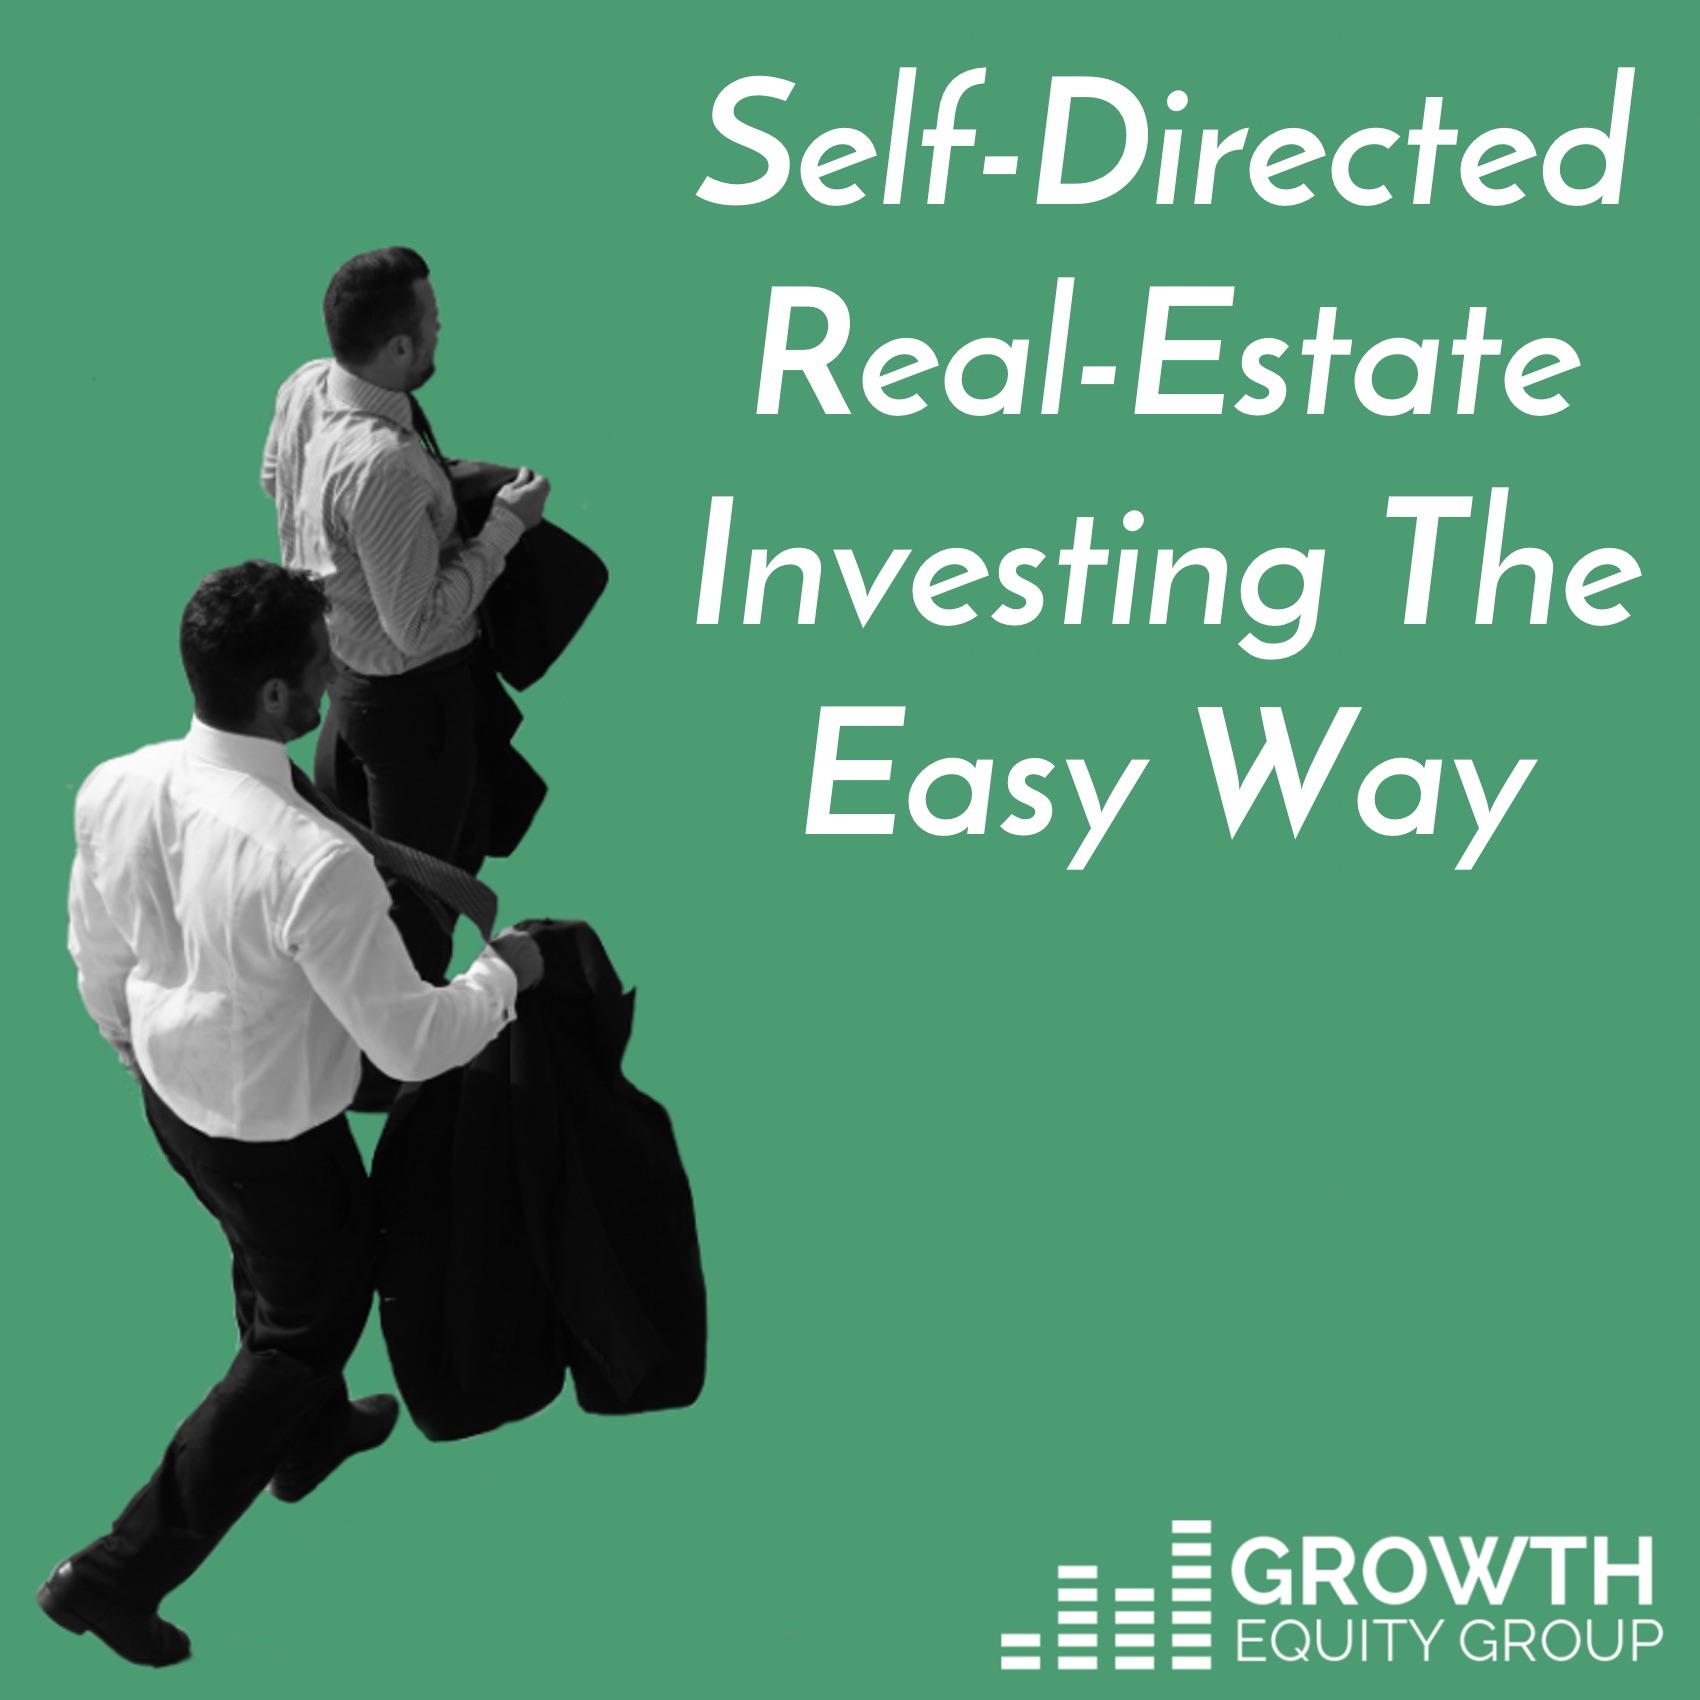 Self-Directed Real-Estate Investing The Easy Way